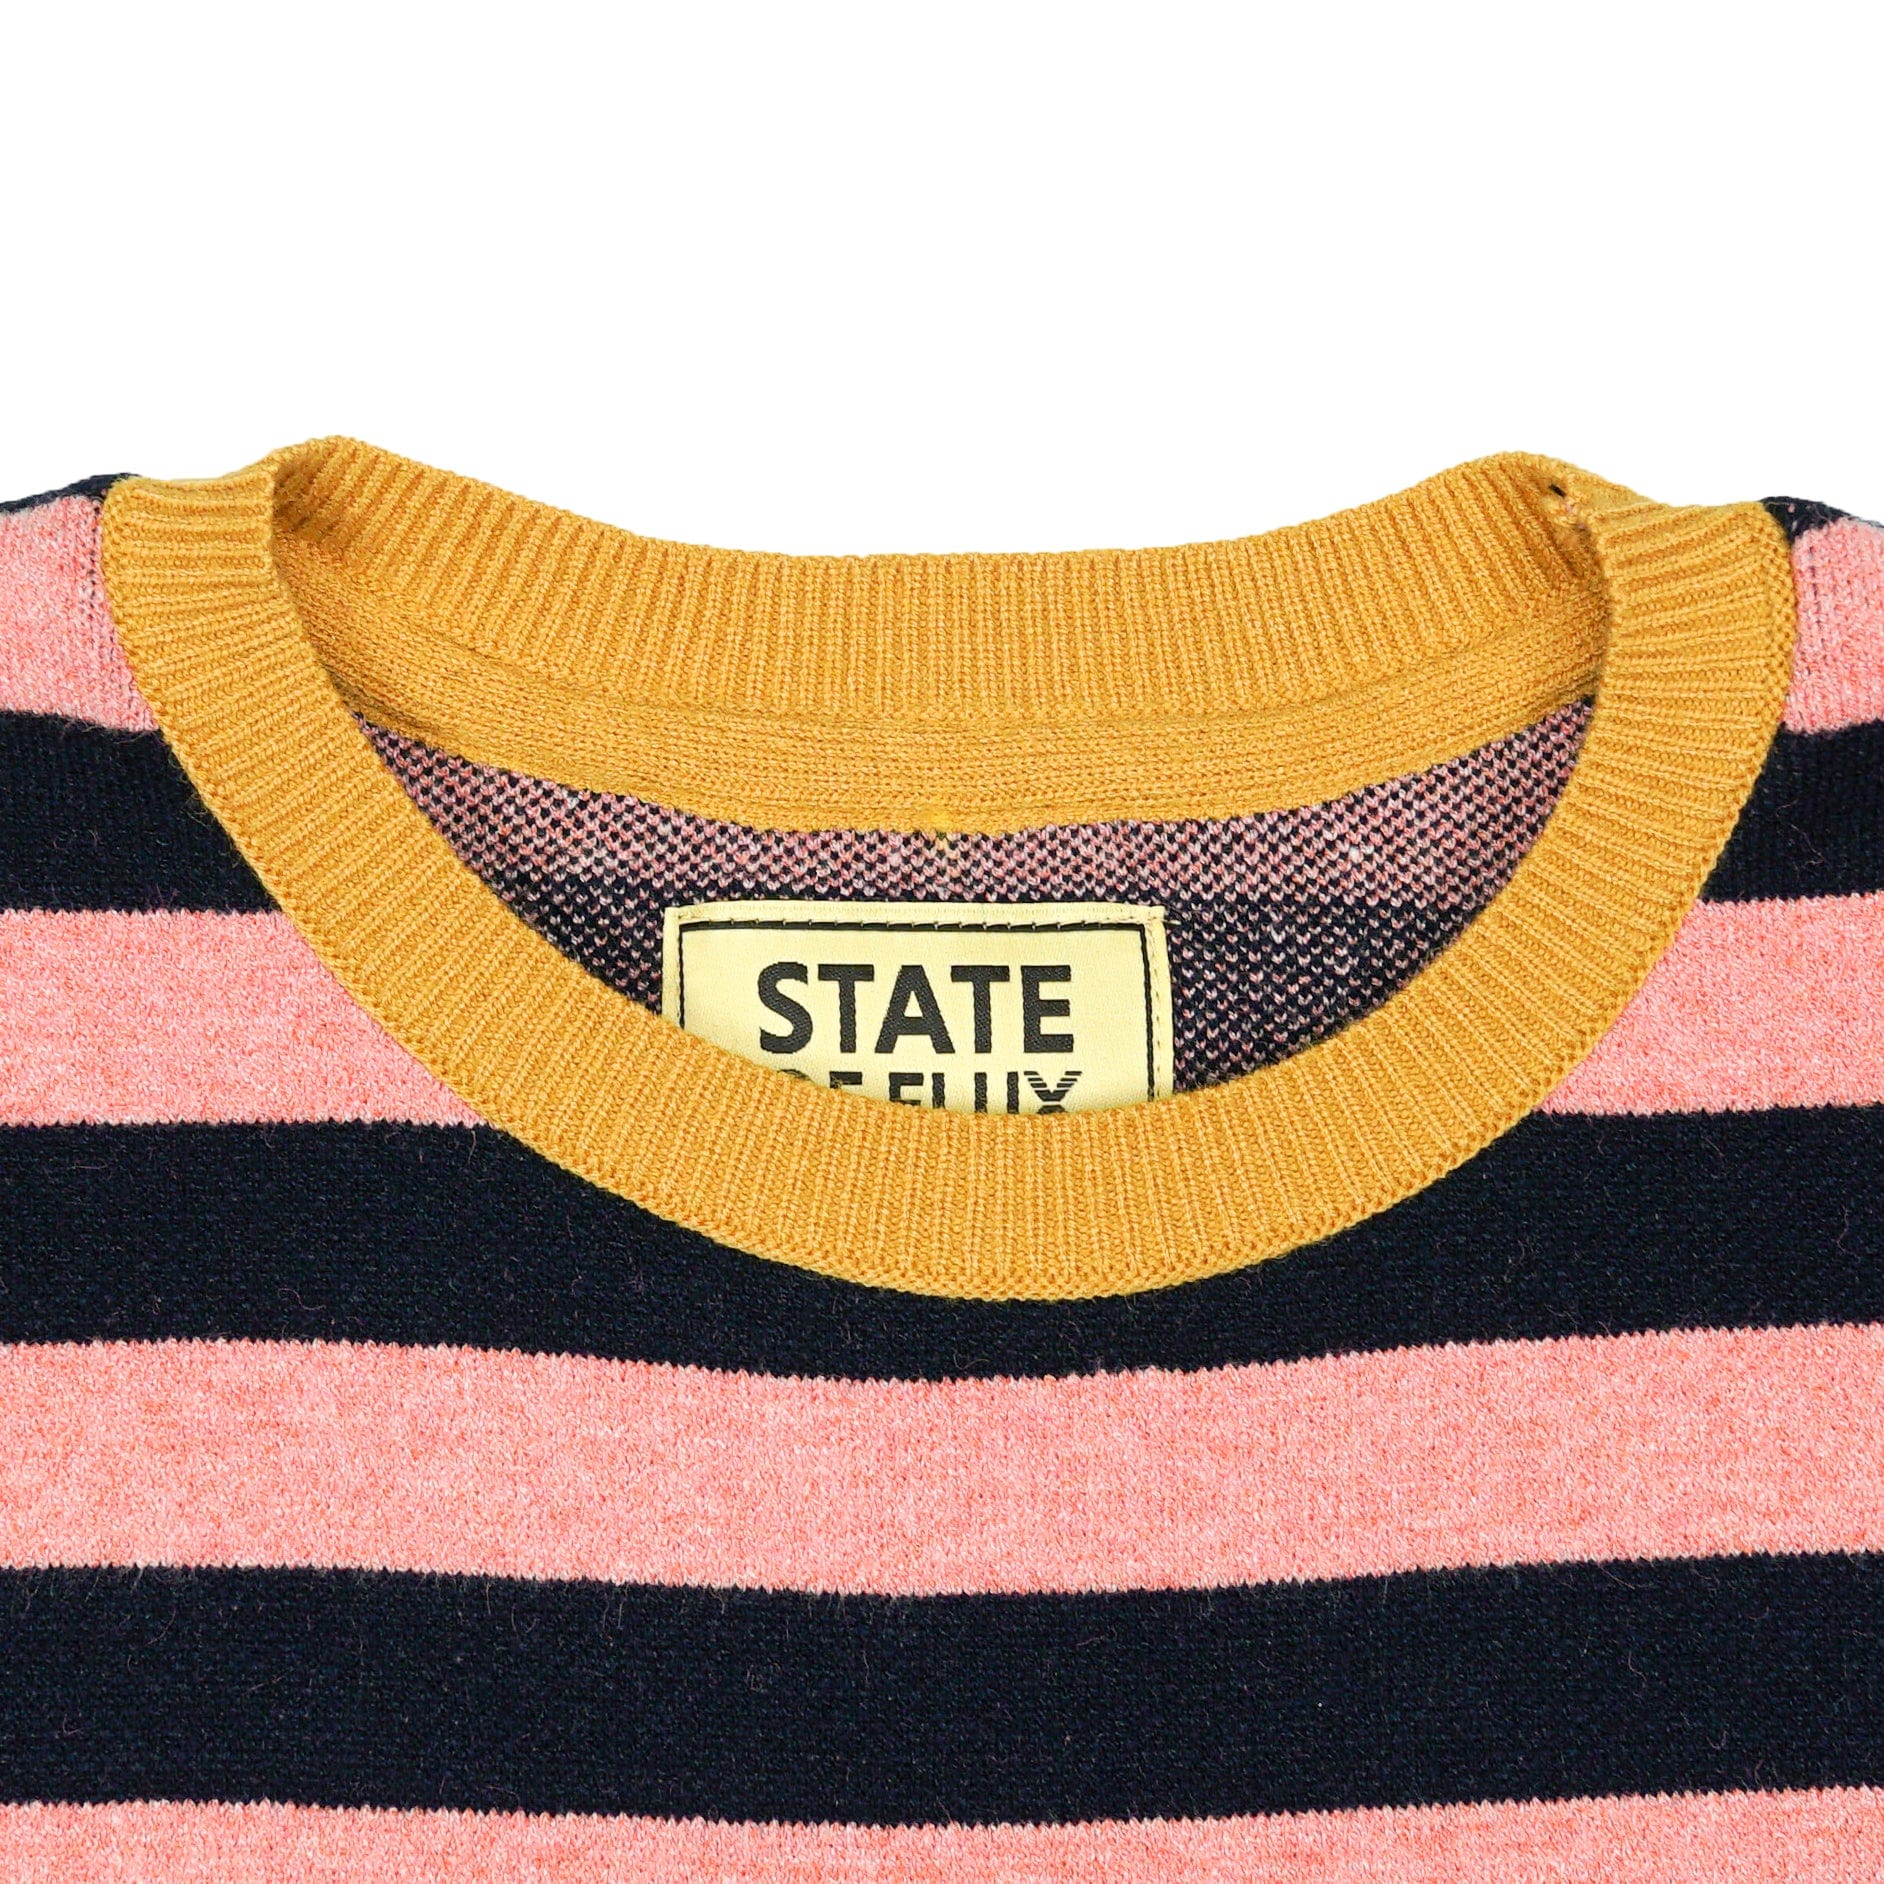 SOF Premium Striped Logo Knit Tee in rose and navy - State Of Flux - State Of Flux